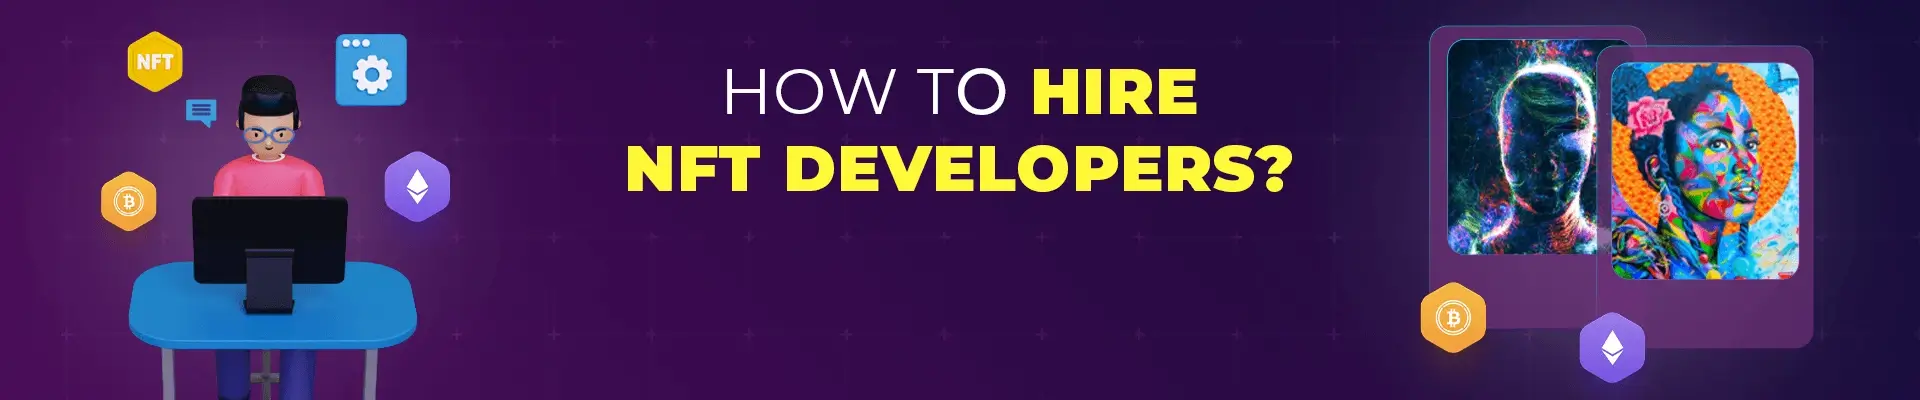 How To Hire NFT Developers? [Complete Guide 2022]